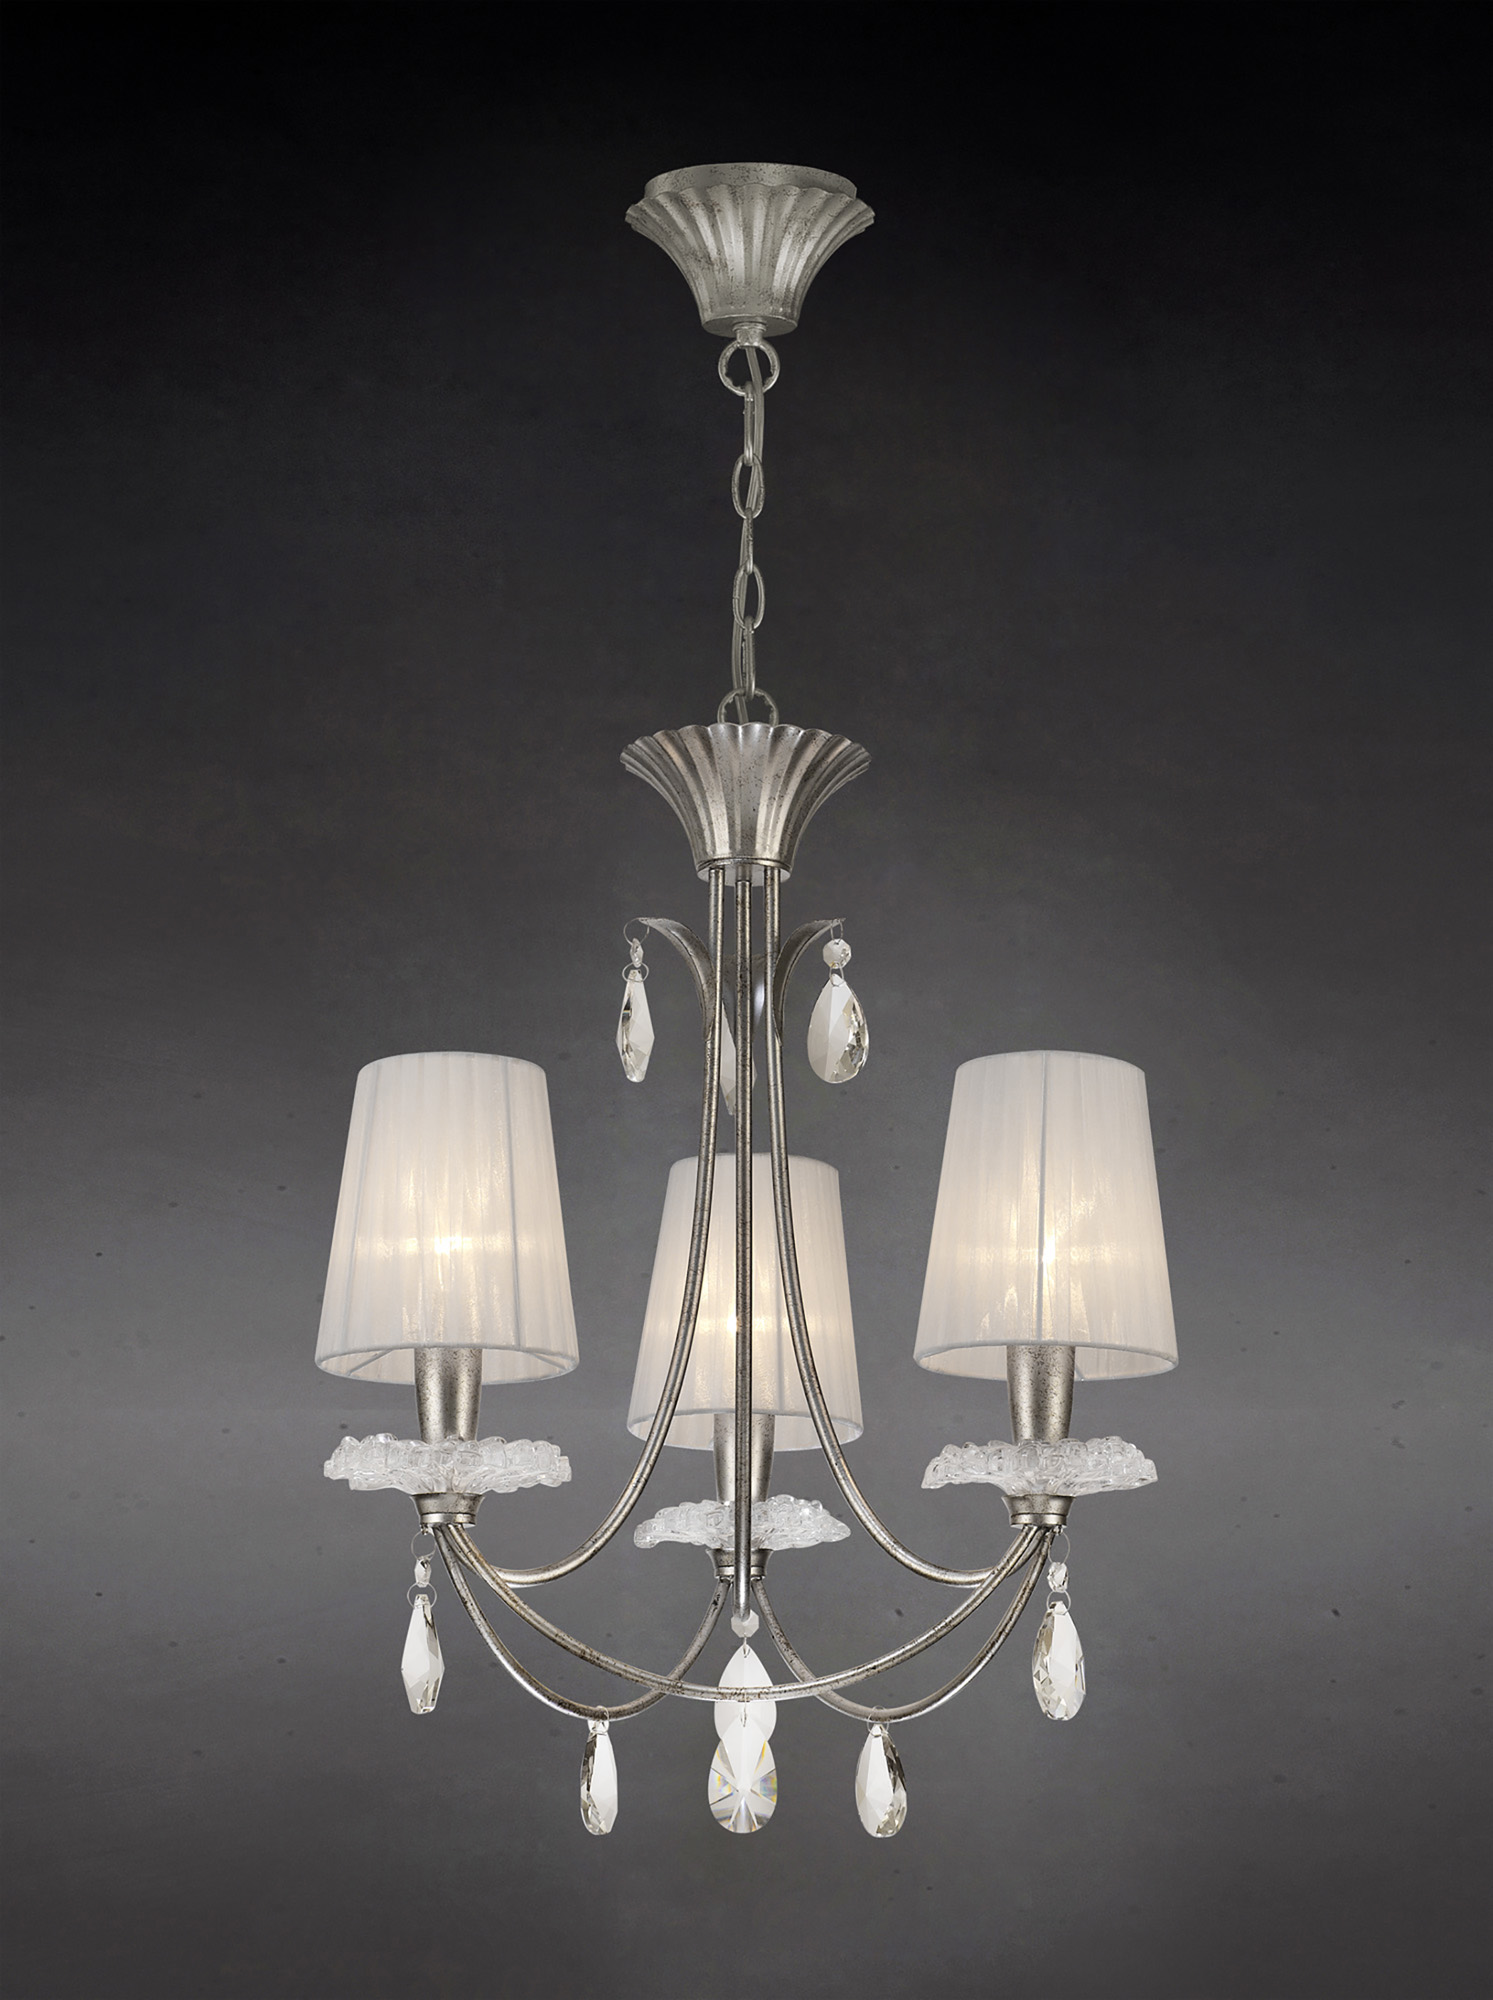 Sophie Siver Ceiling Lights Mantra Multi Arm Fittings